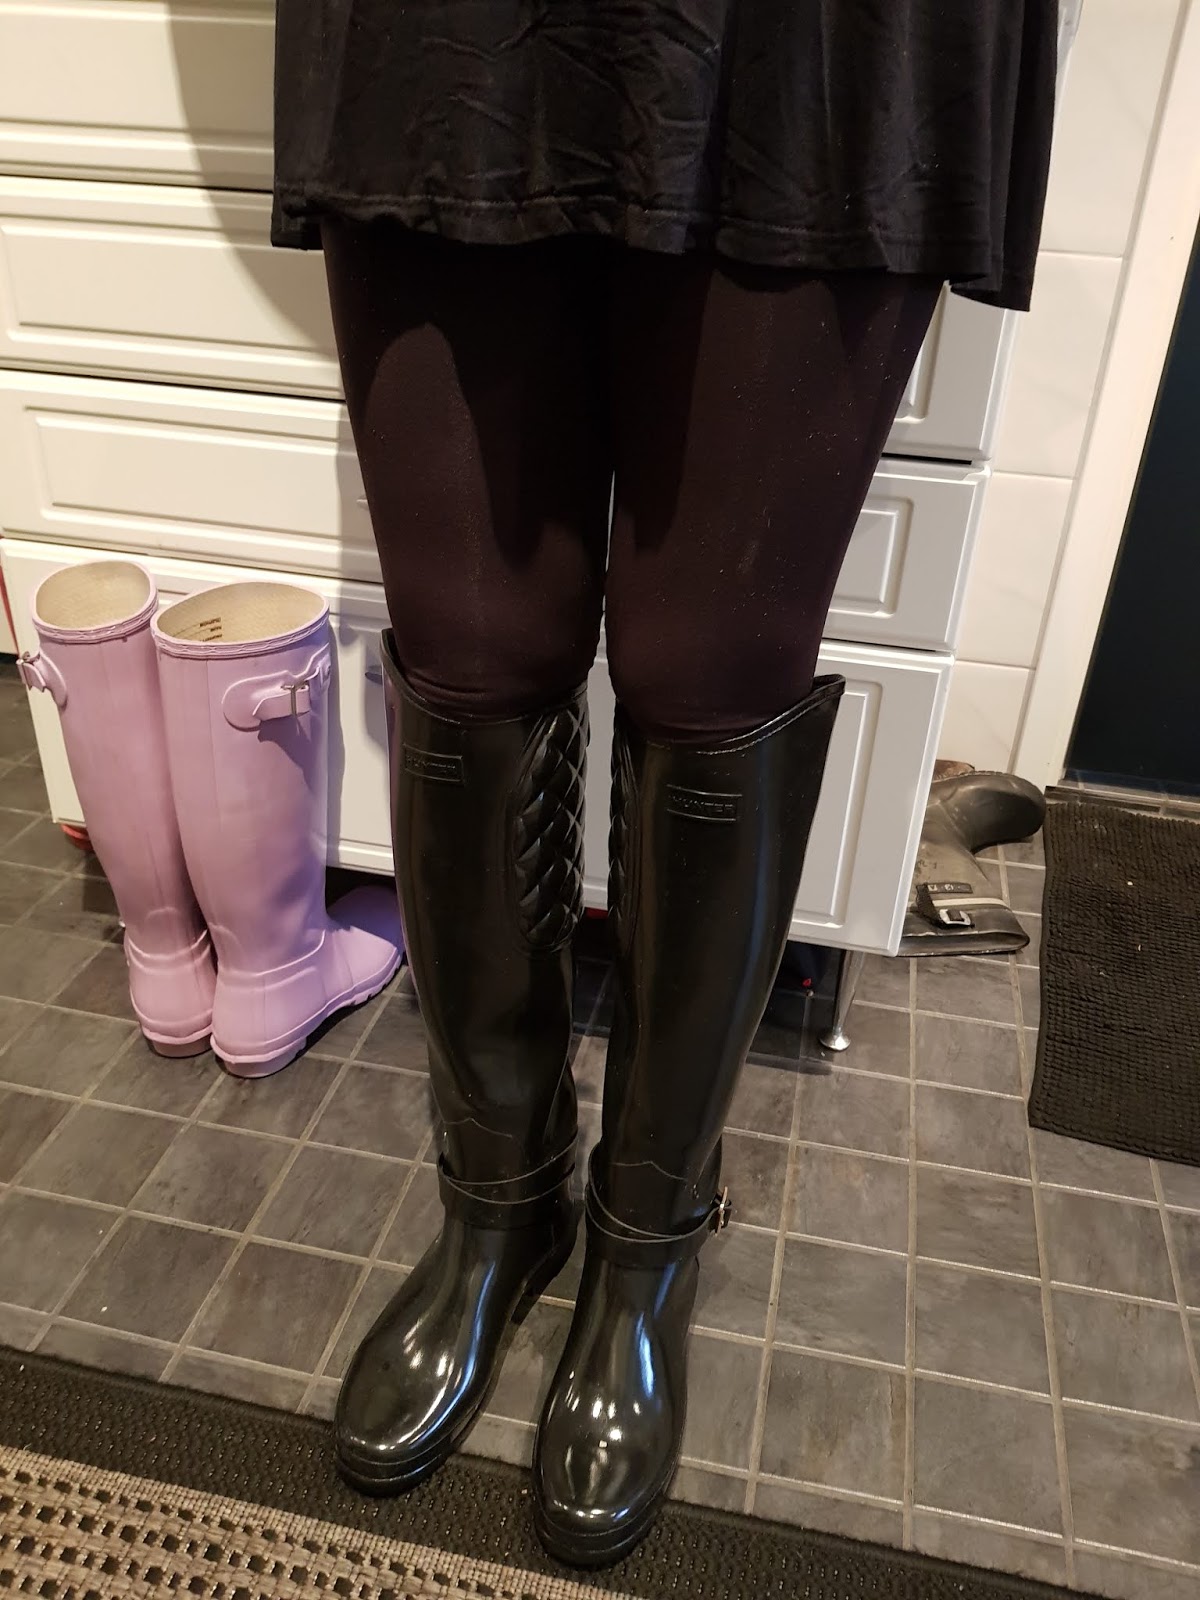 Hunter Wellies for Life: Wellies for my wife